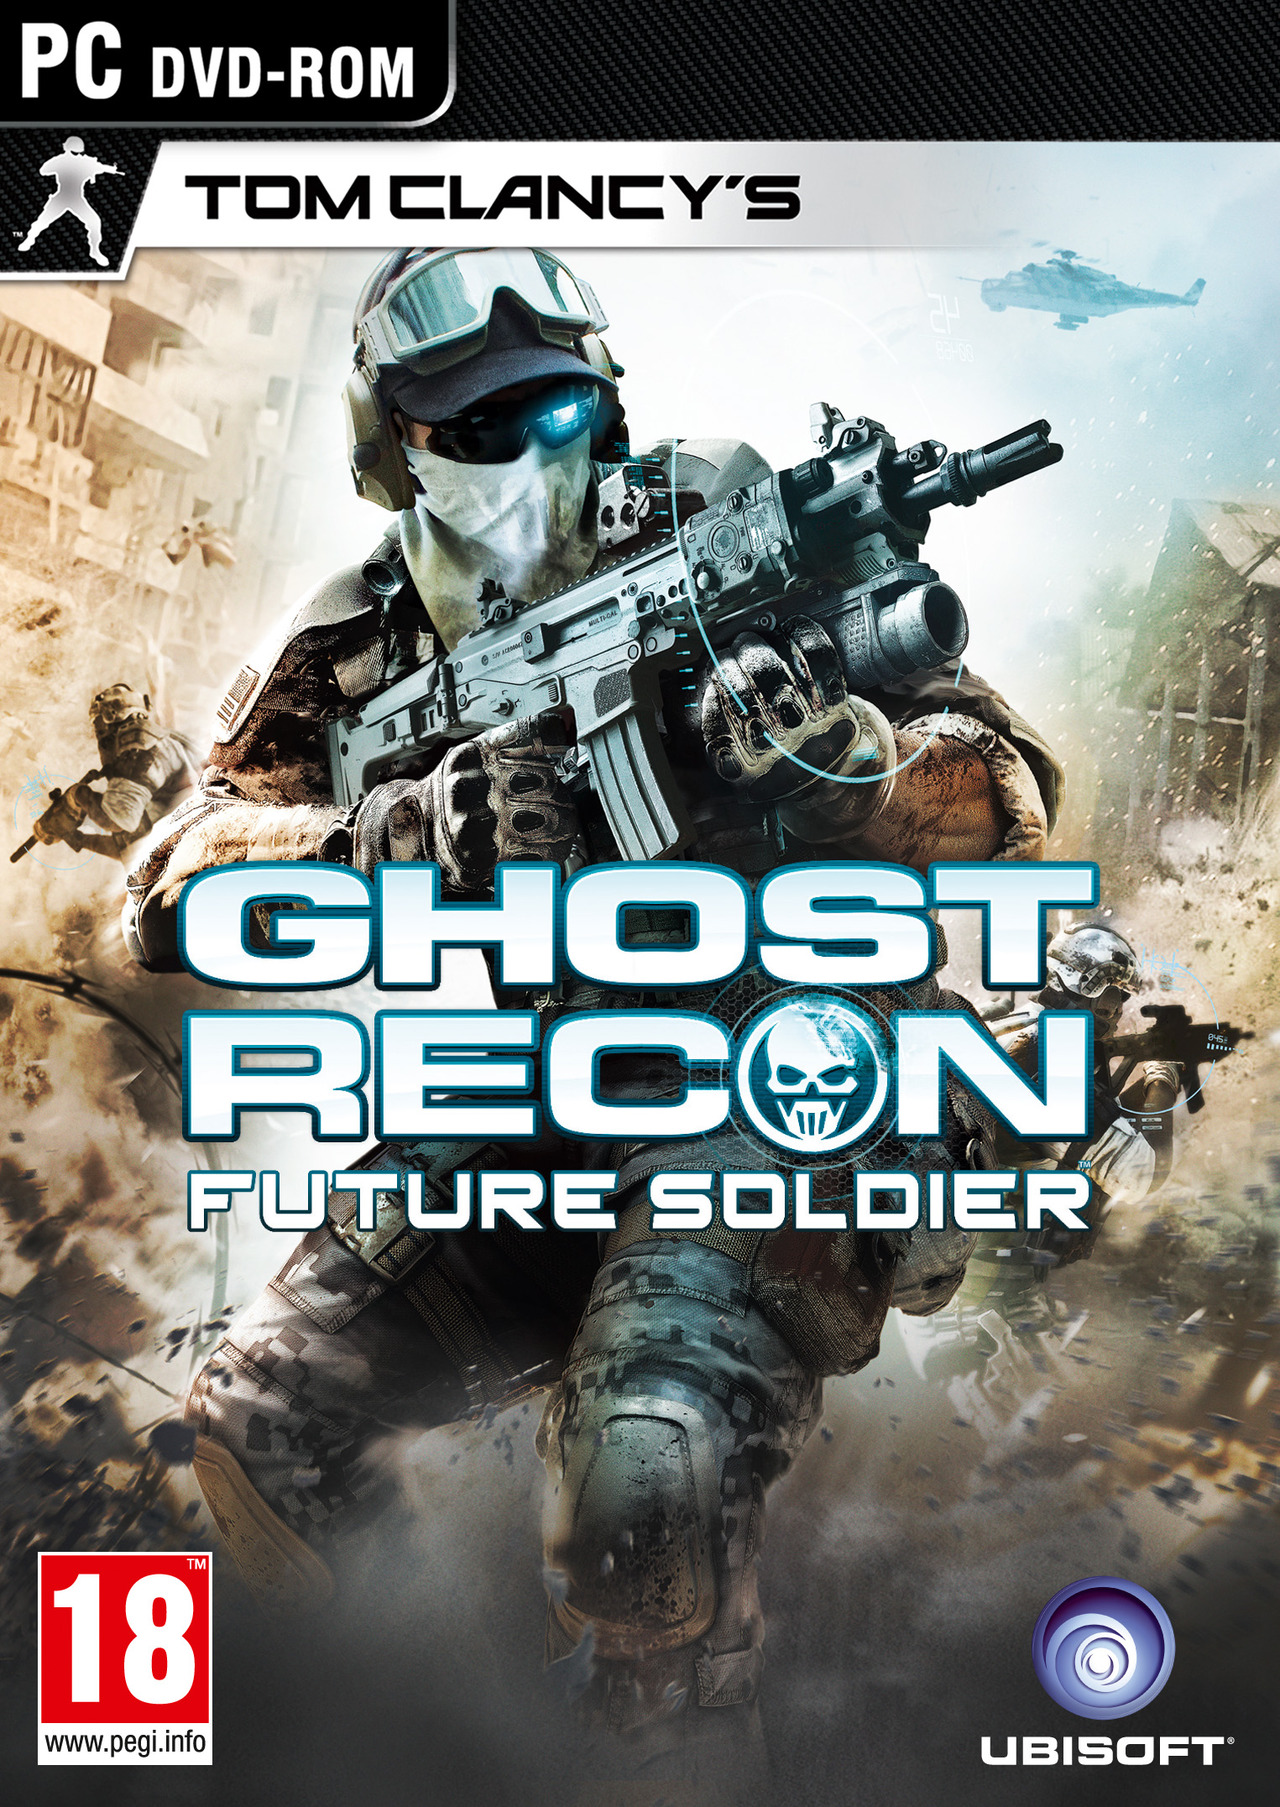 Tom Clancy's Ghost Recon: Future Soldier (2012) RePack